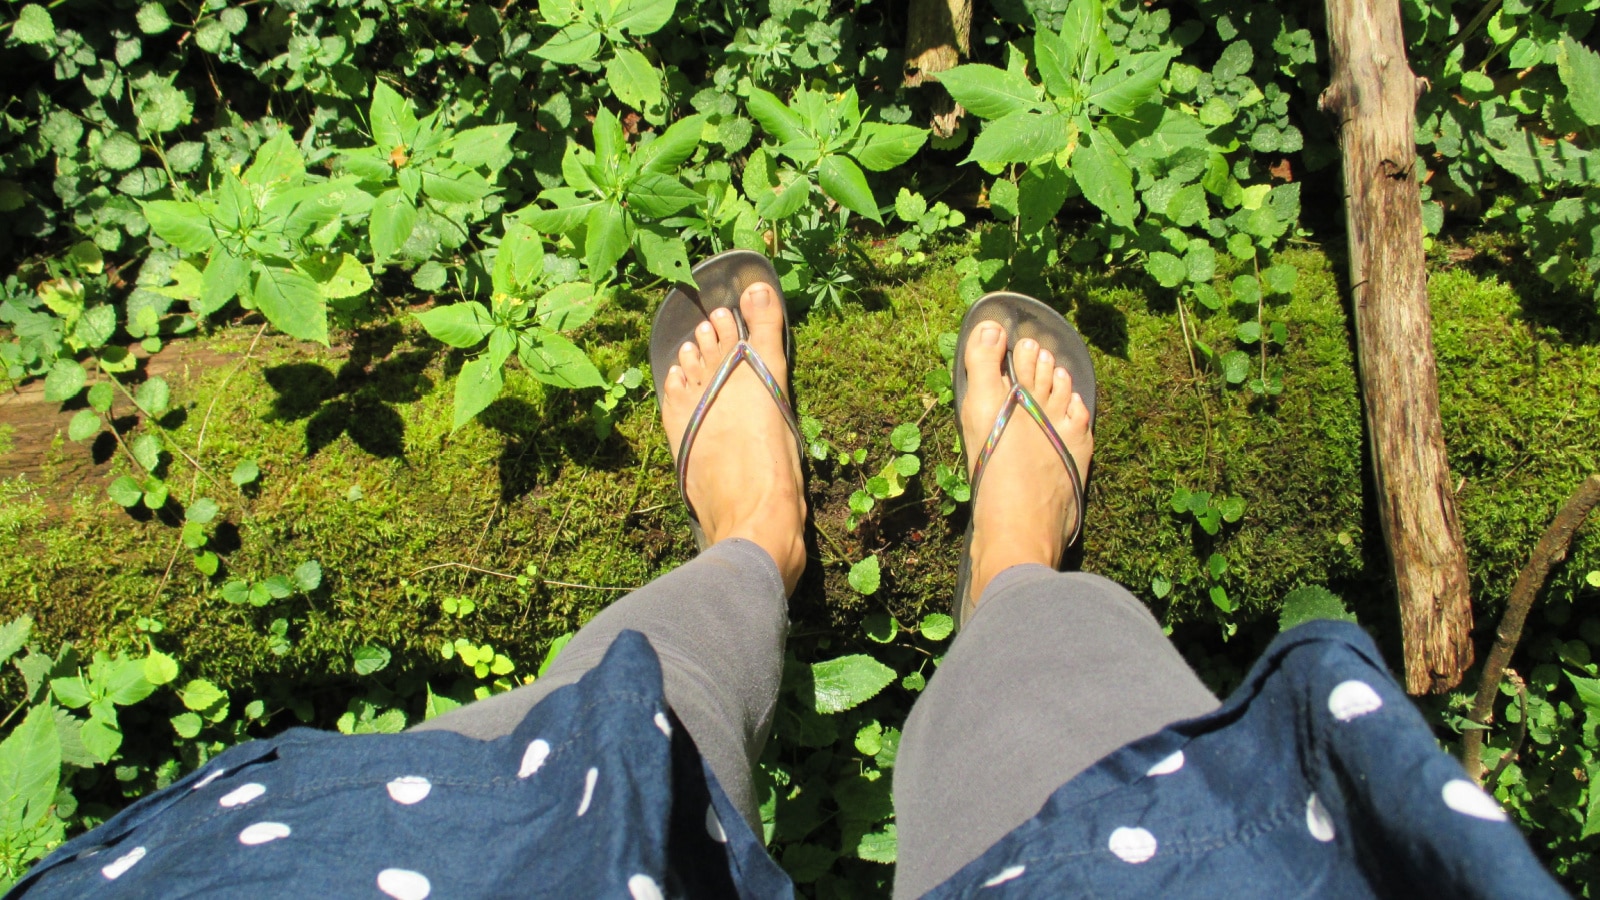 Top view close up of tanned women feet in flip flops walking across a wooden log covered with green moss in a lush sunny forest